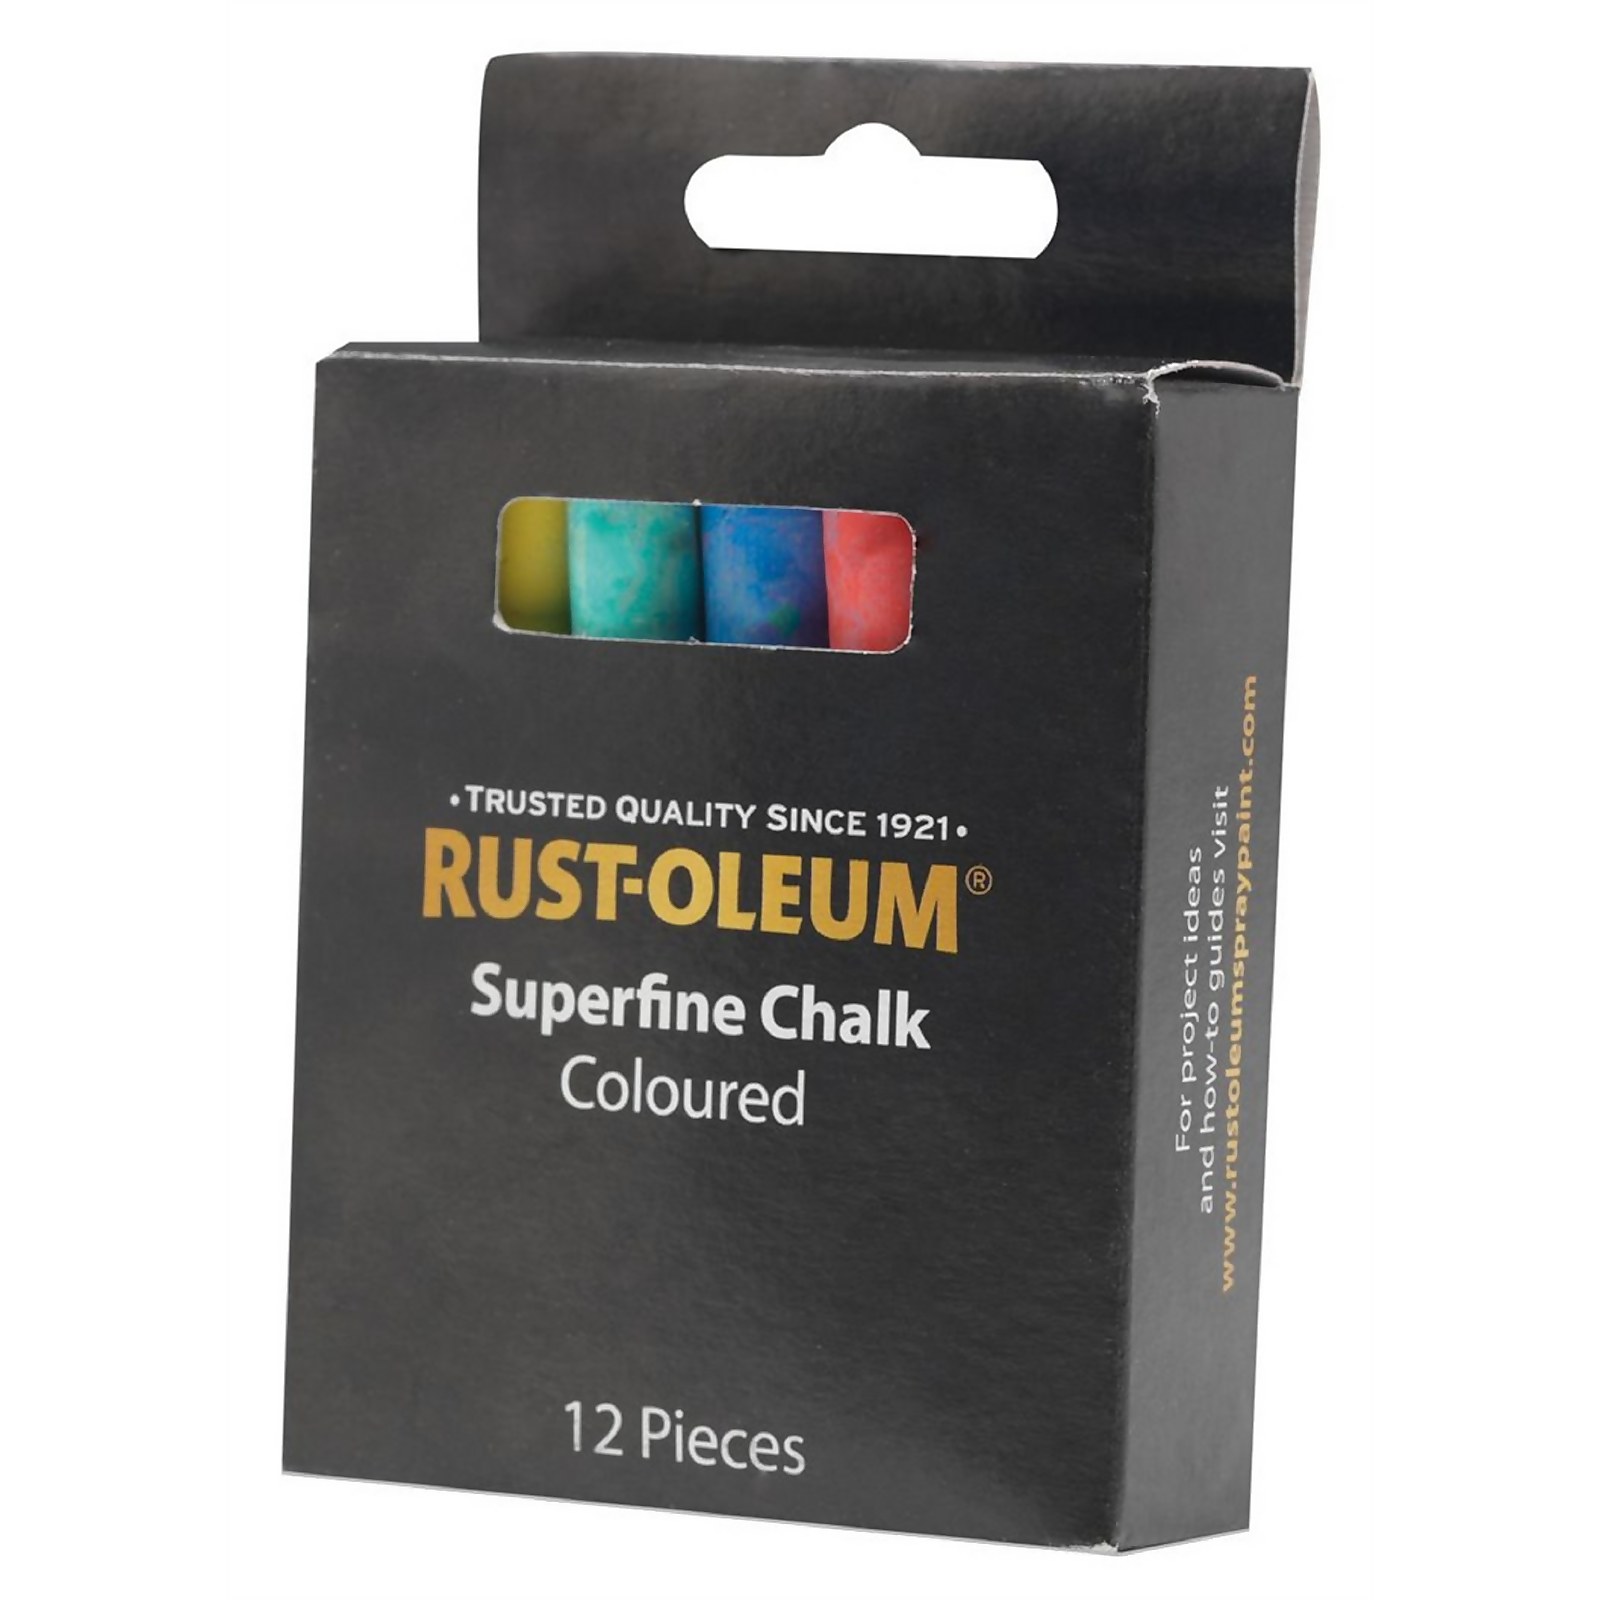 Photo of Rust-oleum Chalk - Pack Of 12 - Coloured